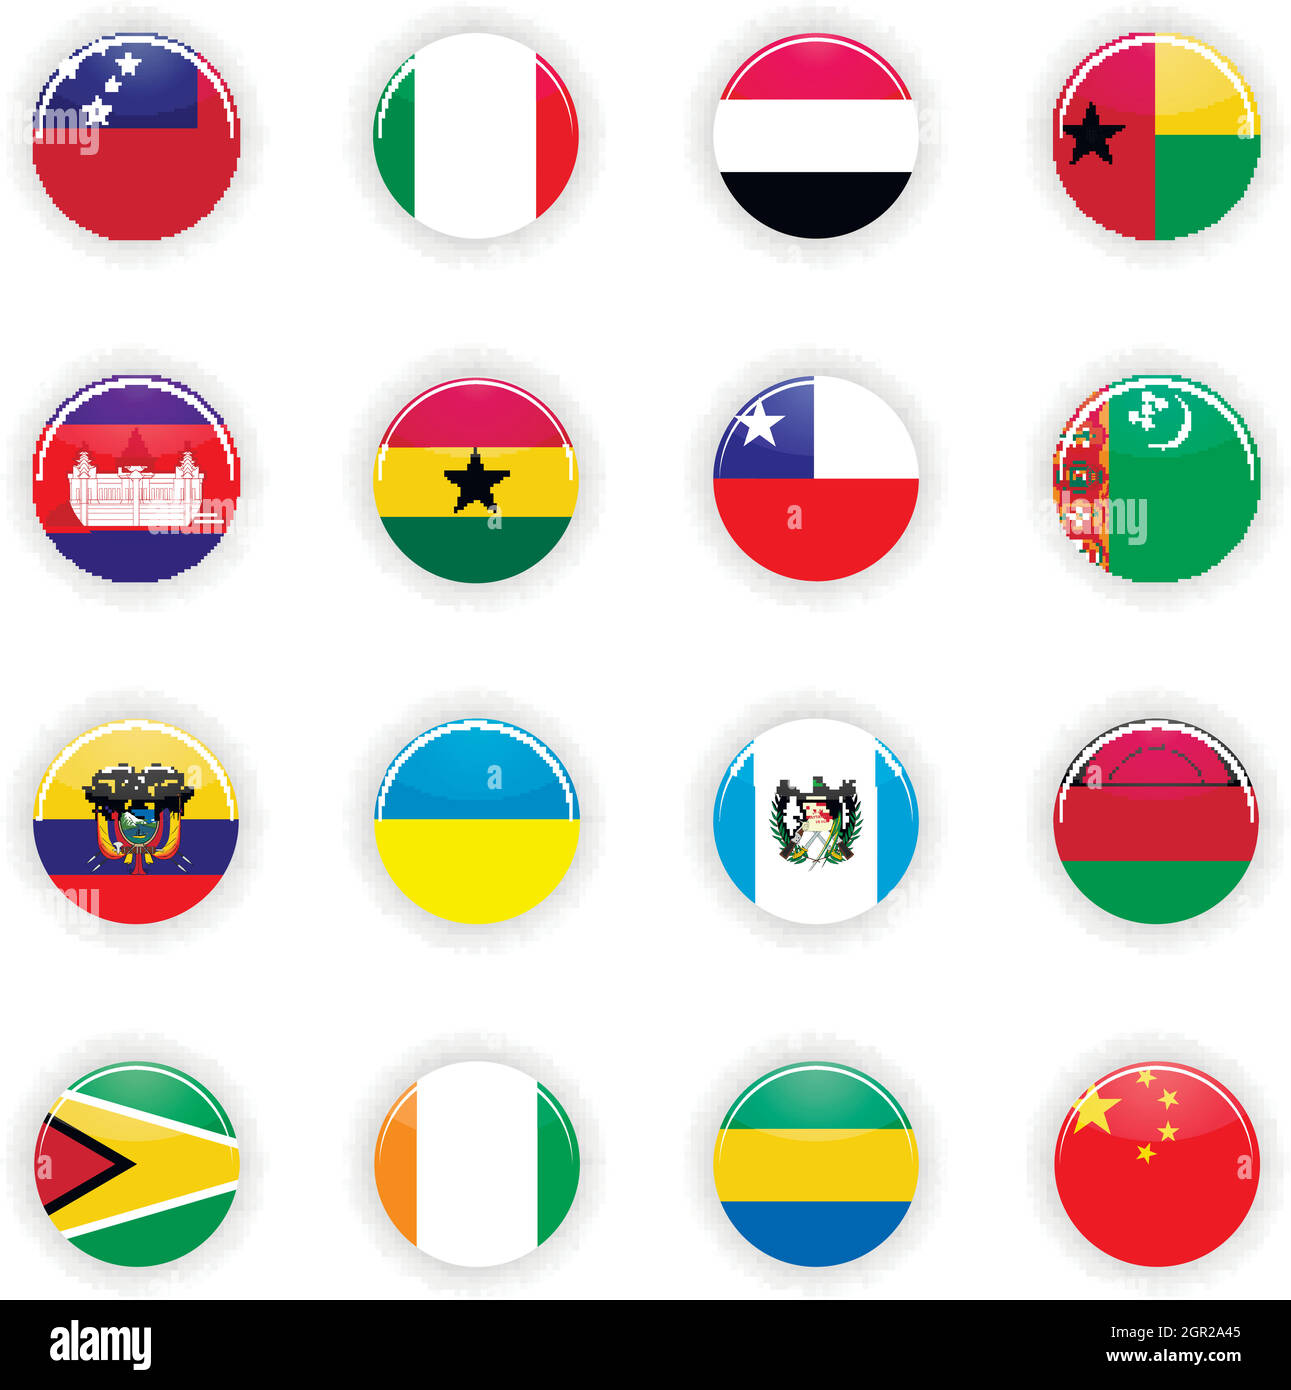 Flags set of the world Stock Vector